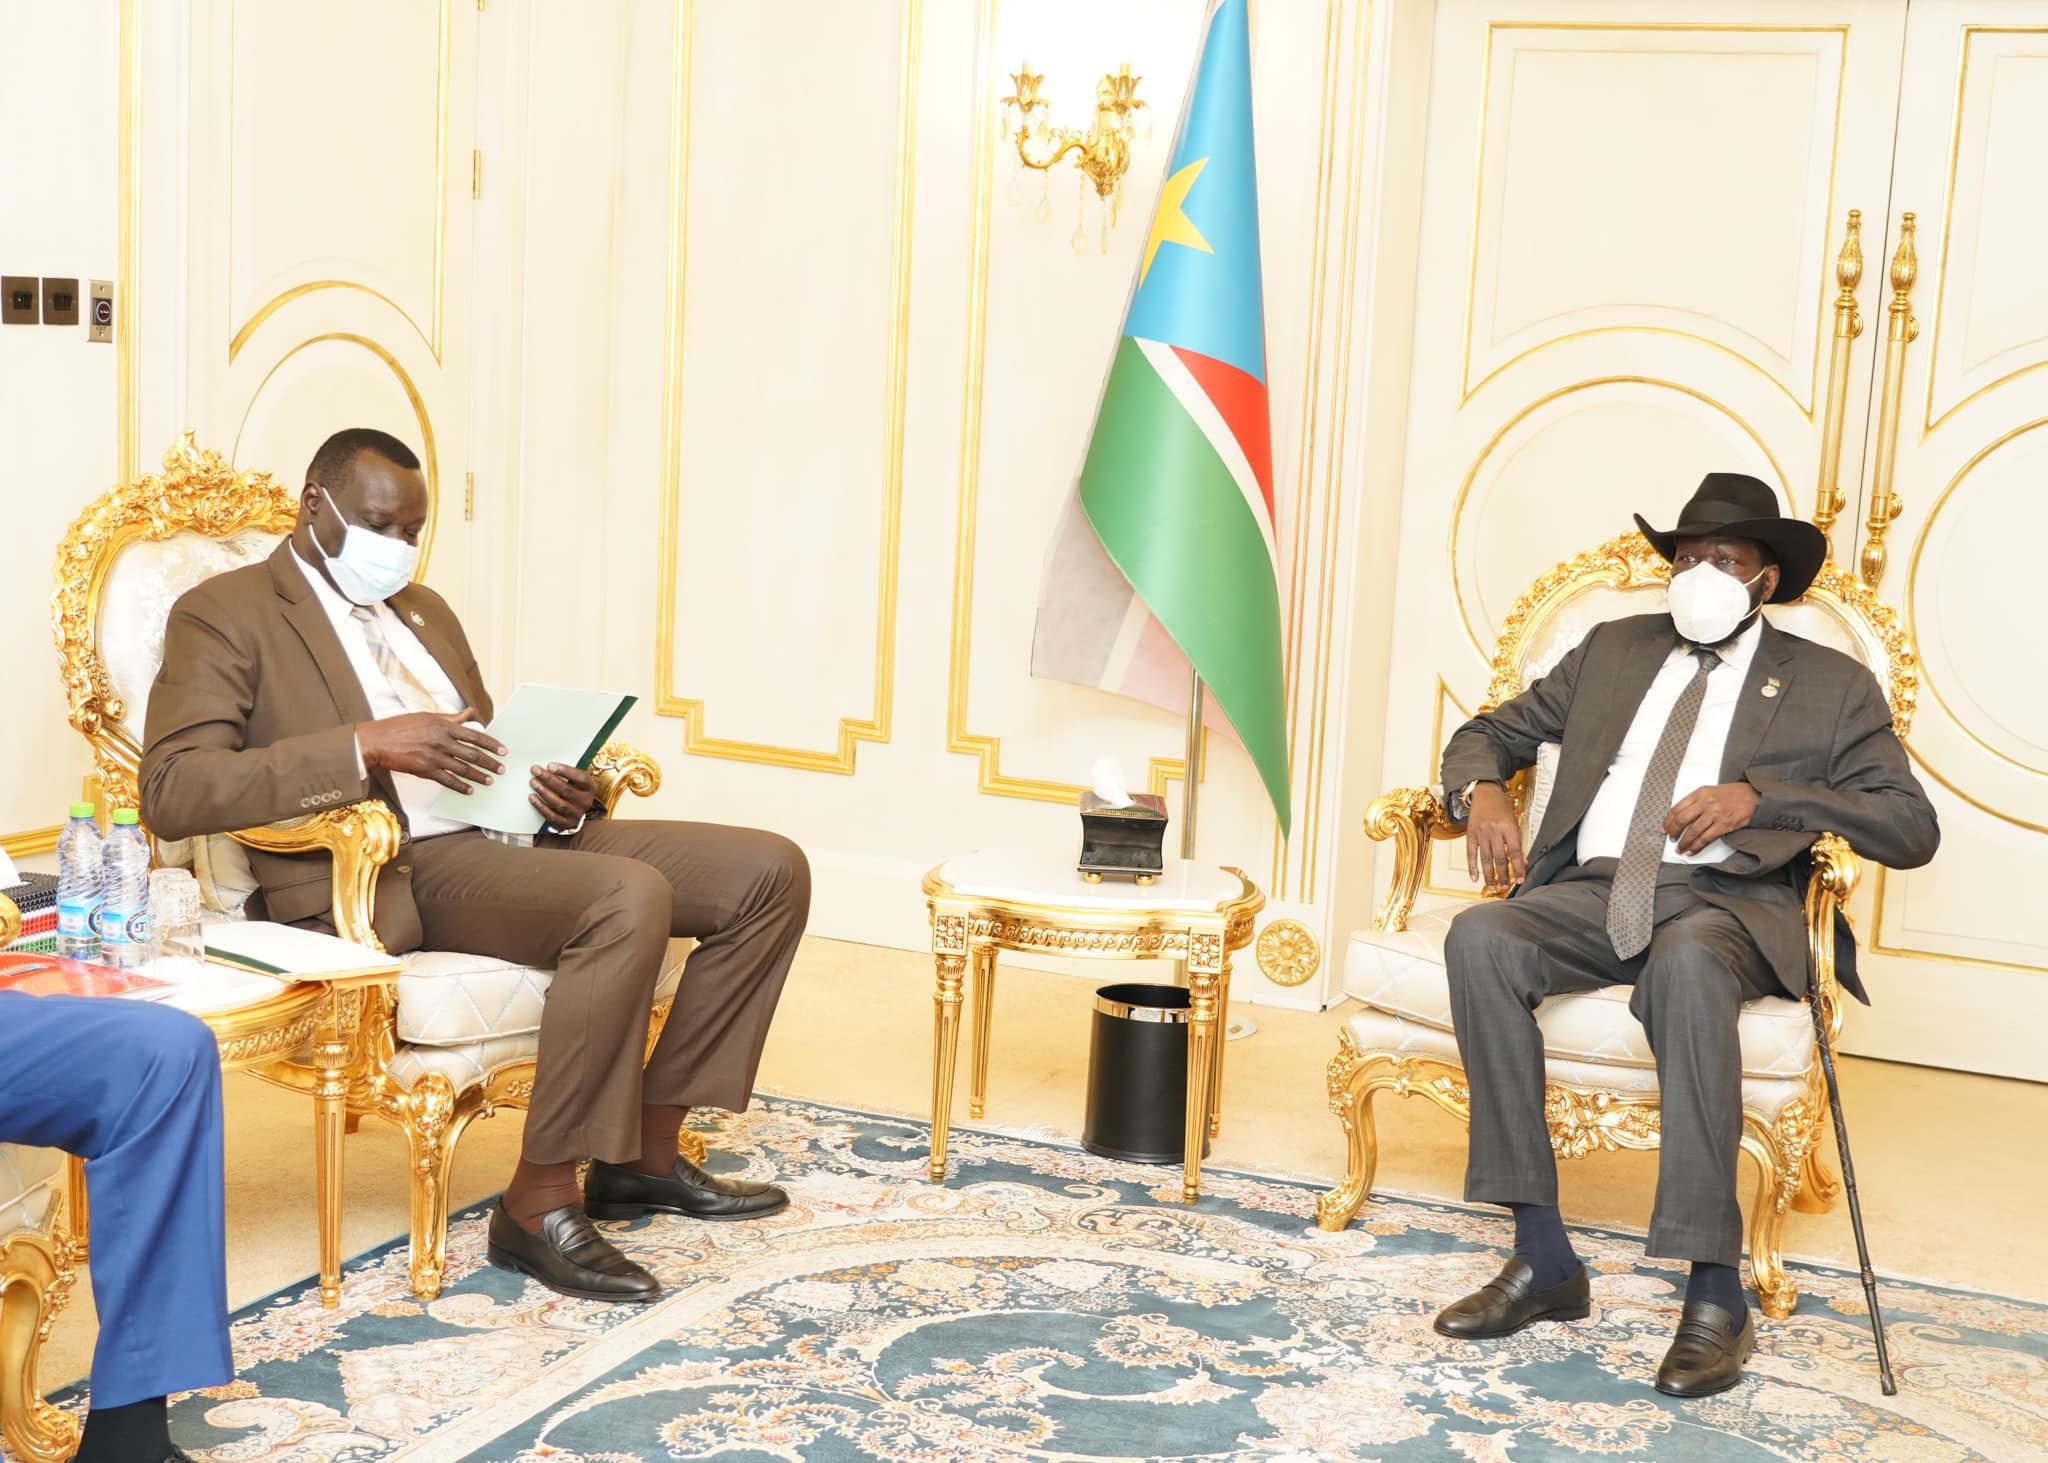 South Sudan oil “still underground”, says Finance Minister Achuil Lual